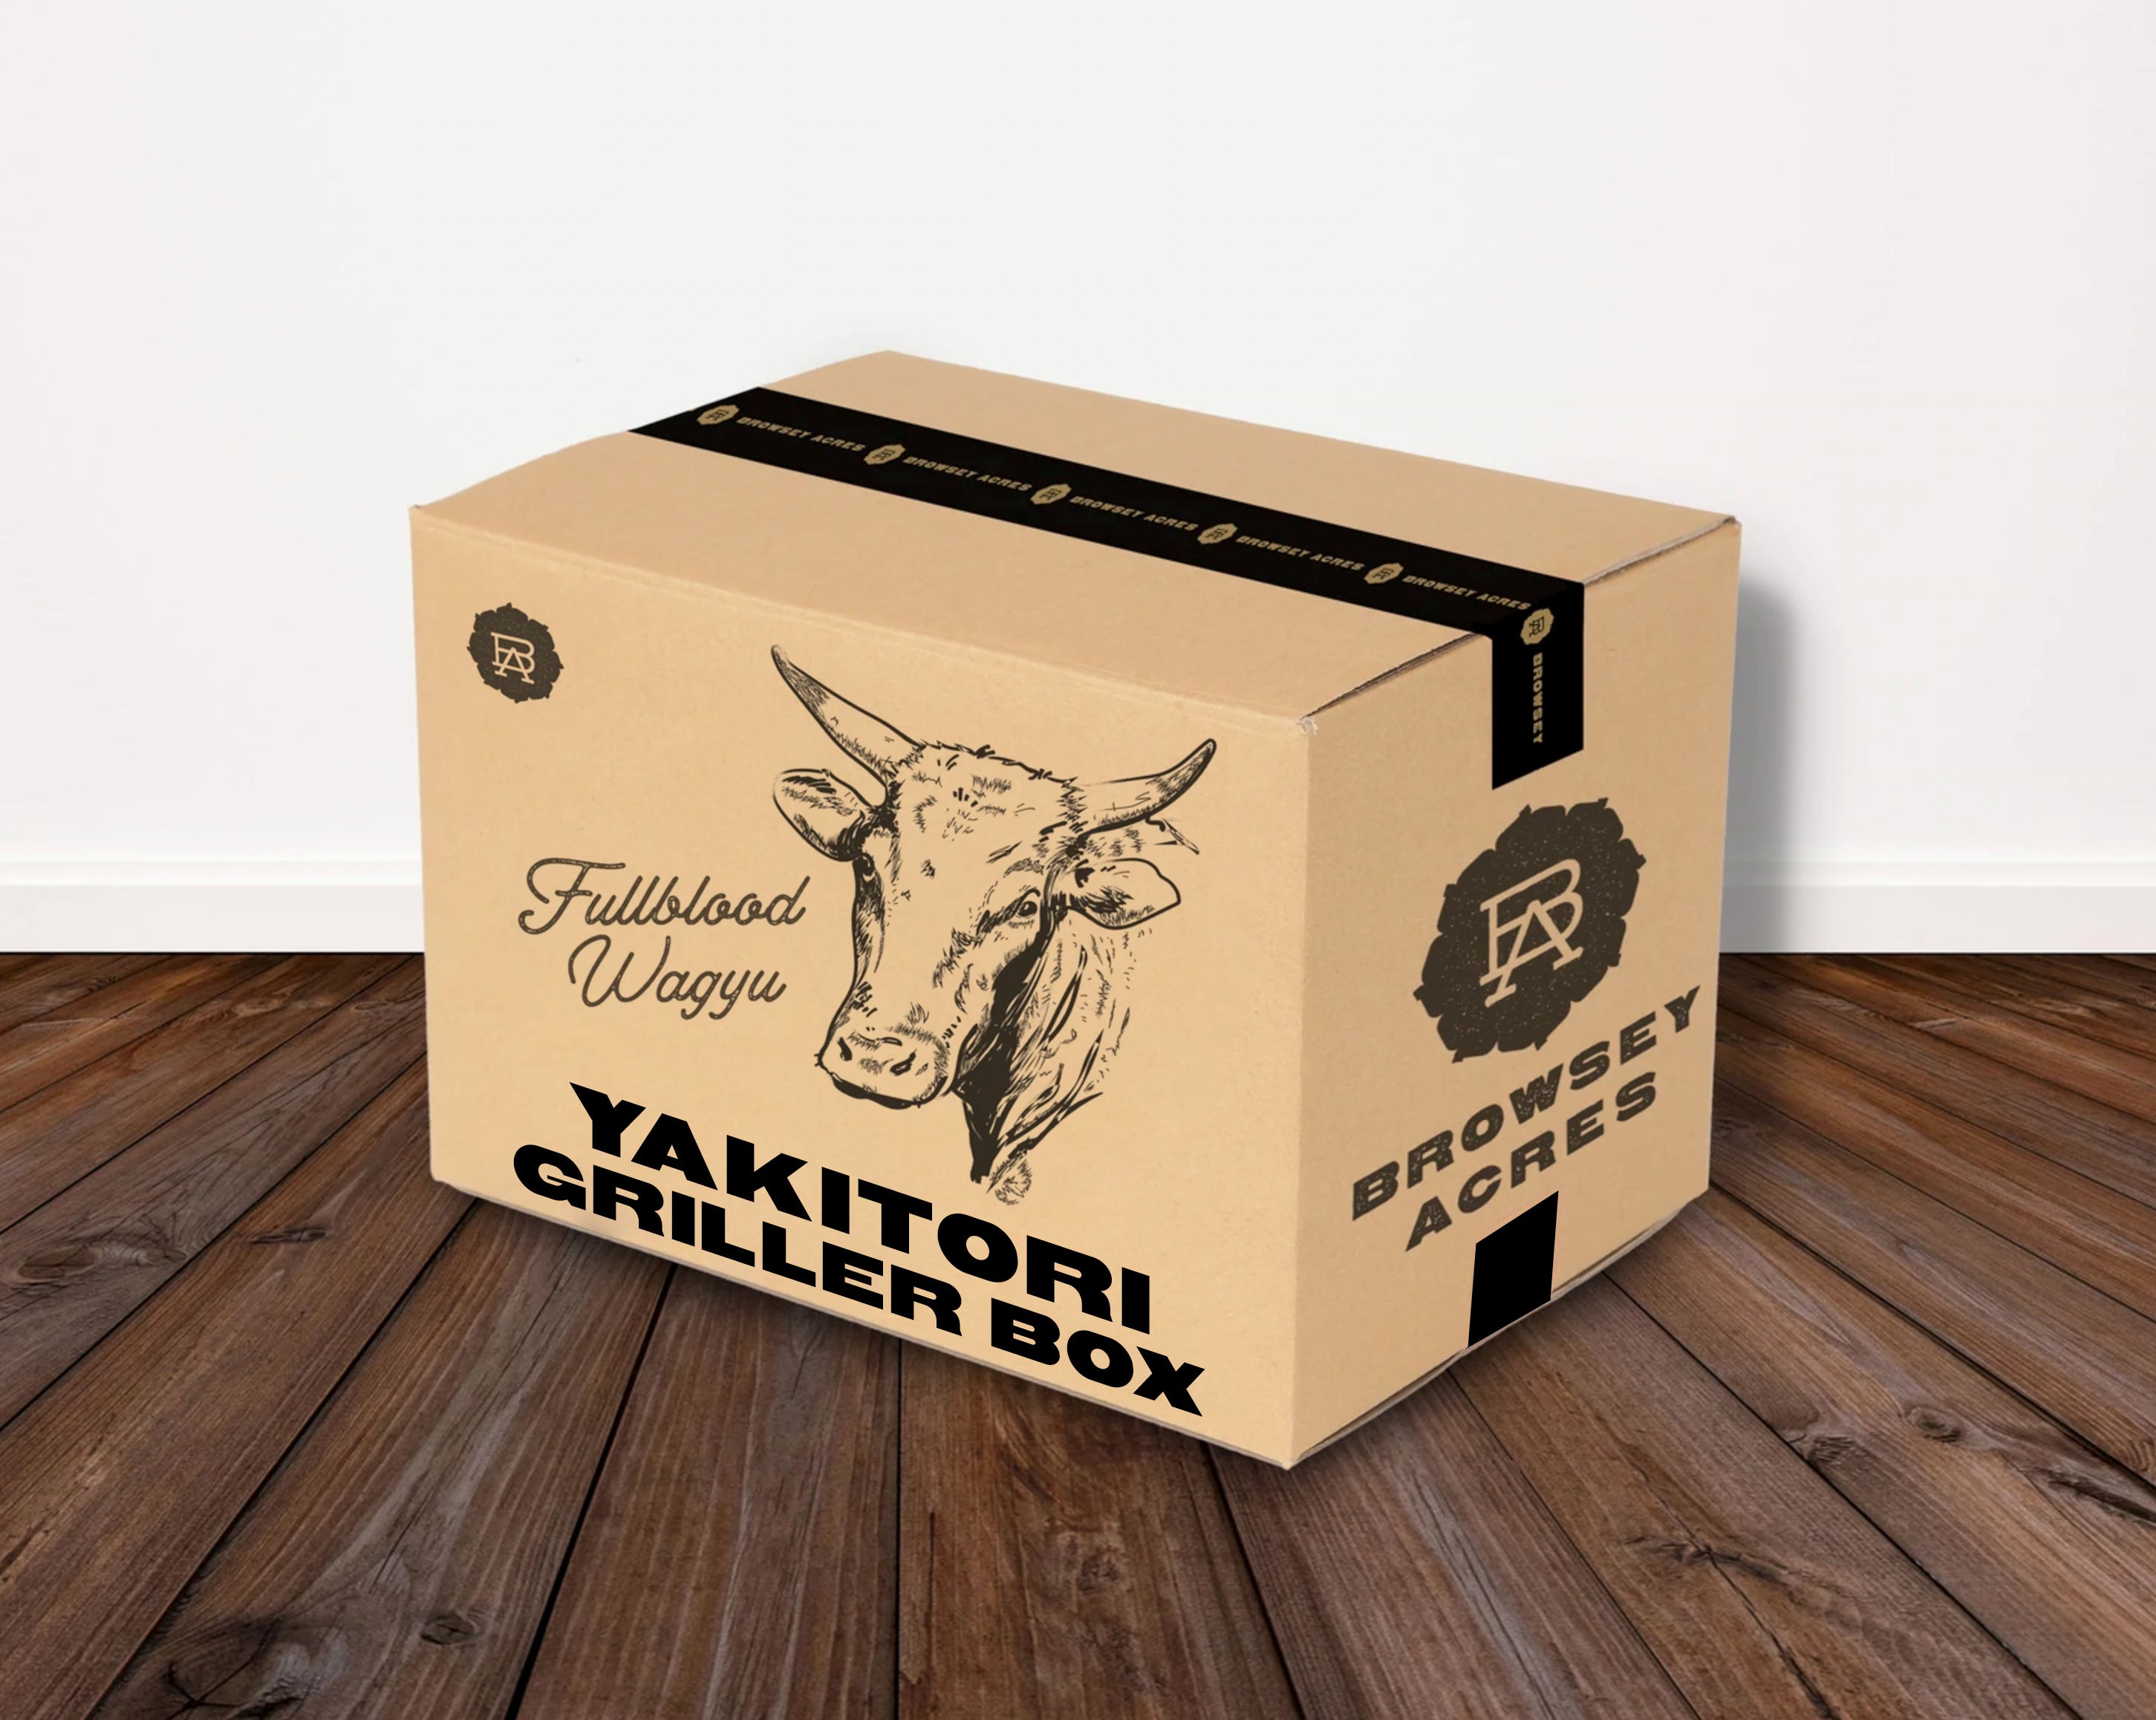 Cardboard box labeled 'Fullblood Wagyu YAKITORI GRILLER BOX' from 'BROWSEY ACRES' on a wooden floor.